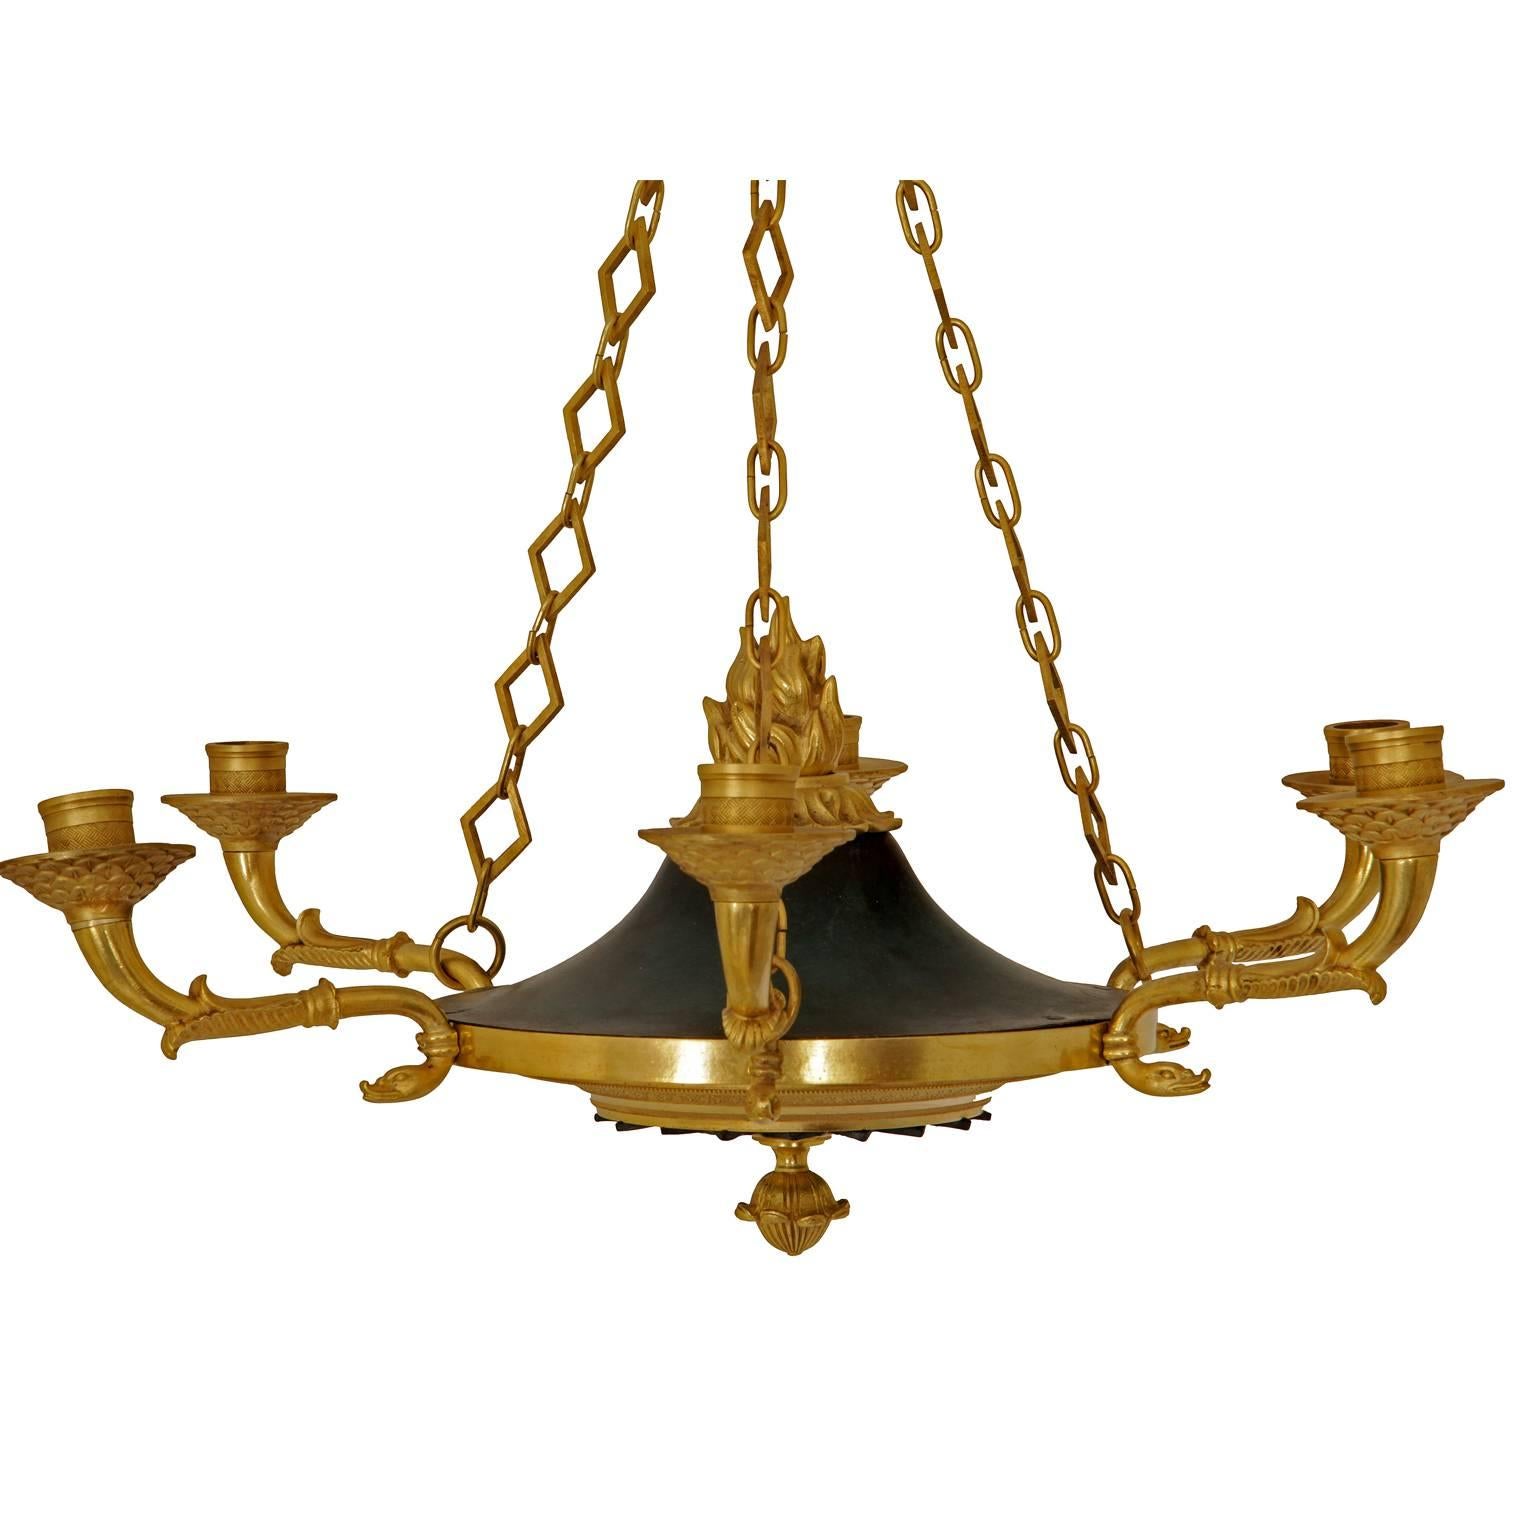 Six-arm bronze chandelier with palmettes and blossoms decor, flower crown and a torch flame ornament in its centre. The bronze is already carefully restored and cleaned.

For the electrification we assume no liability and no warranty.